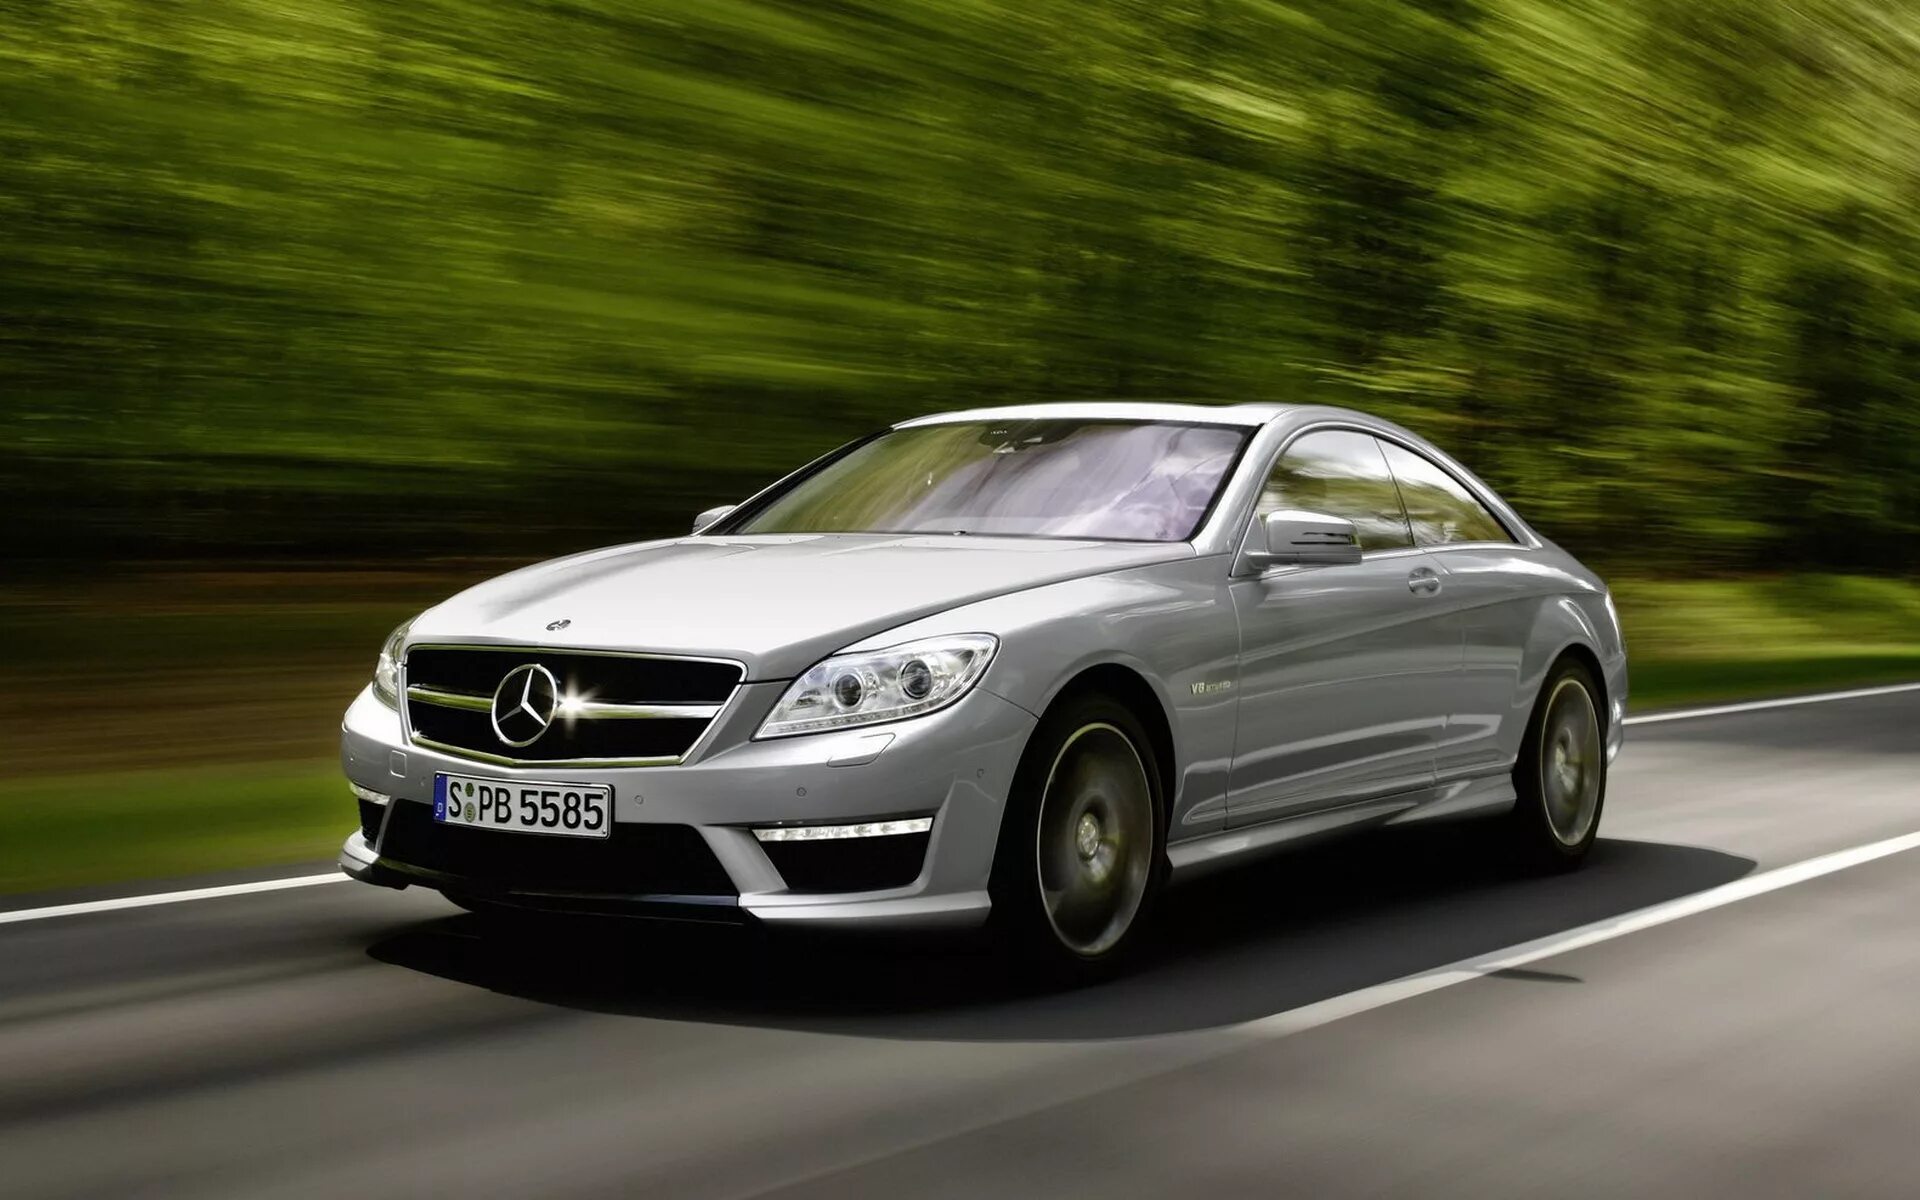 Про мерсе. Mercedes Benz CL 63 AMG. Мерседес CL 63 АМГ. Mercedes CL 63 AMG 2012. Mercedes Benz CLS 63 AMG.